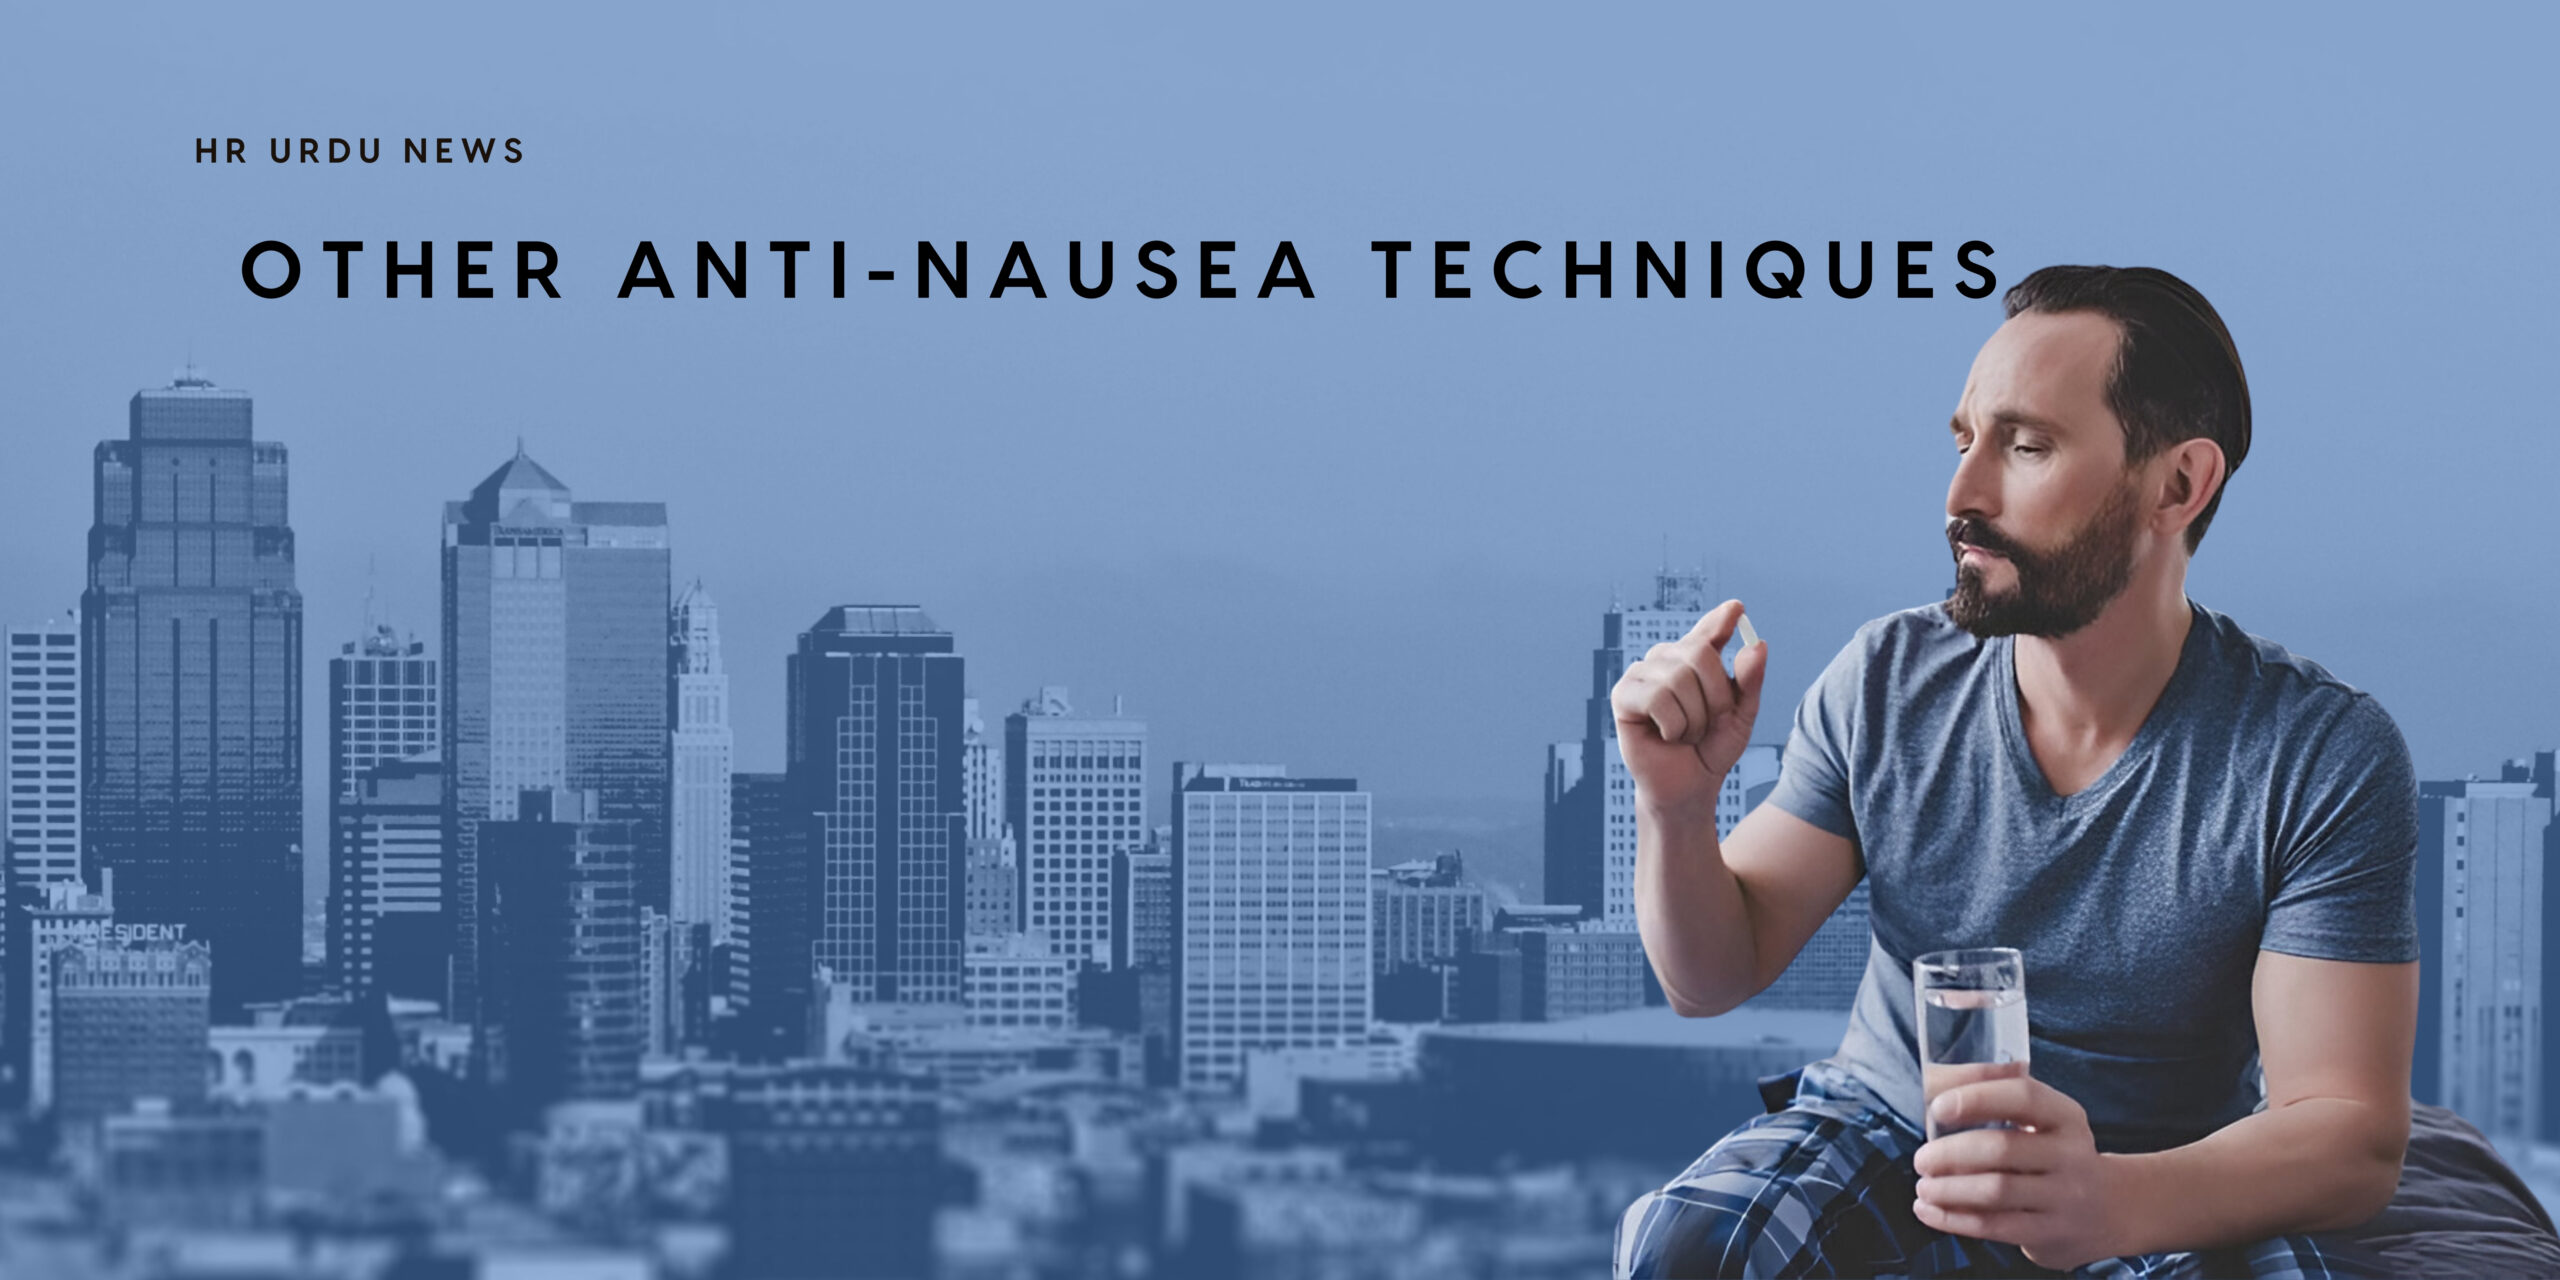 Other Anti-Nausea Techniques